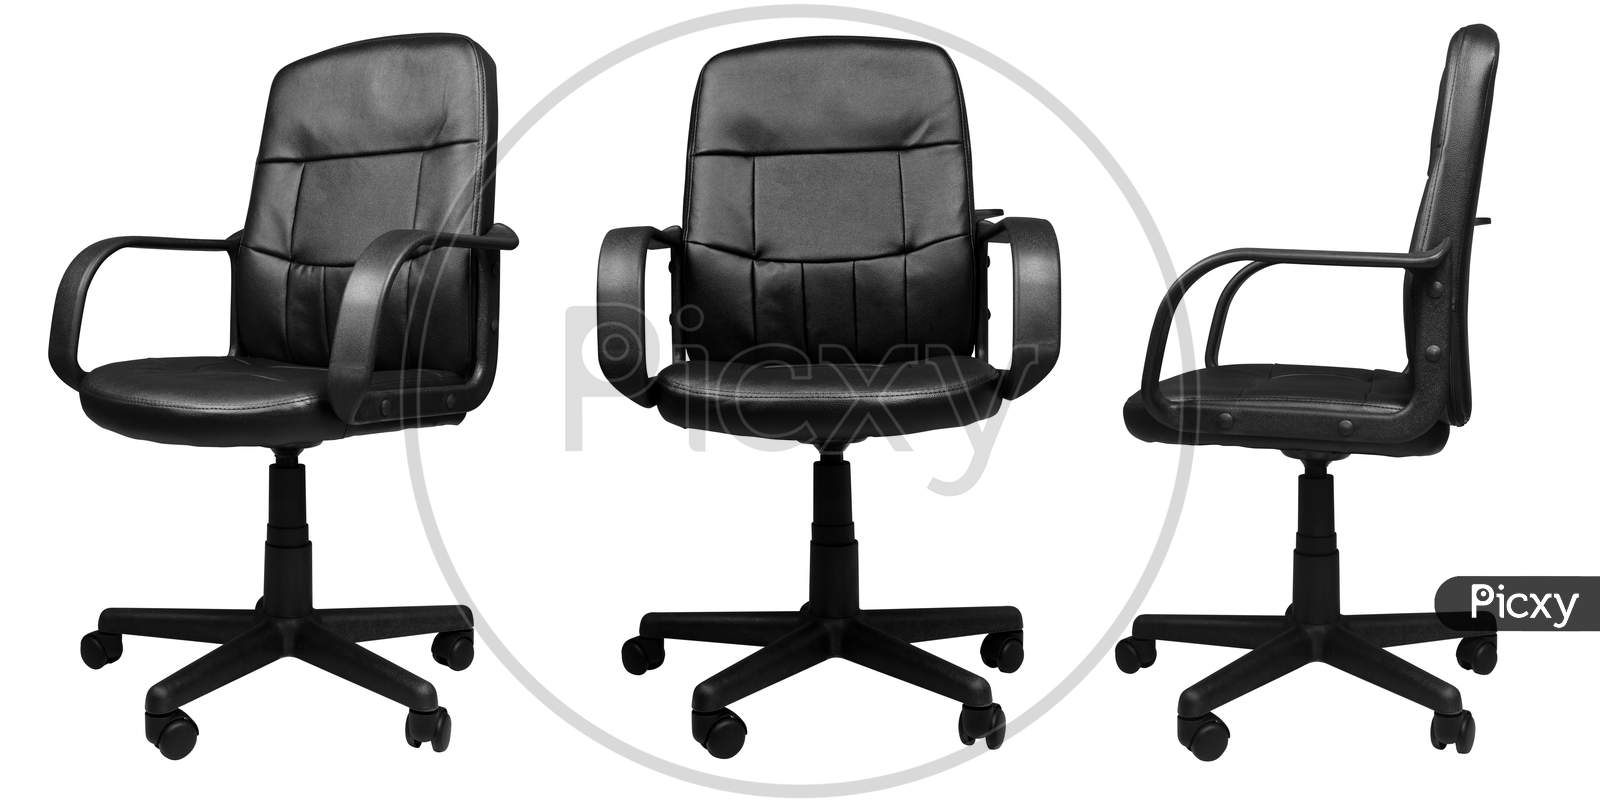 3 Different Angels Of Office Leather Chair Isolated On White Background